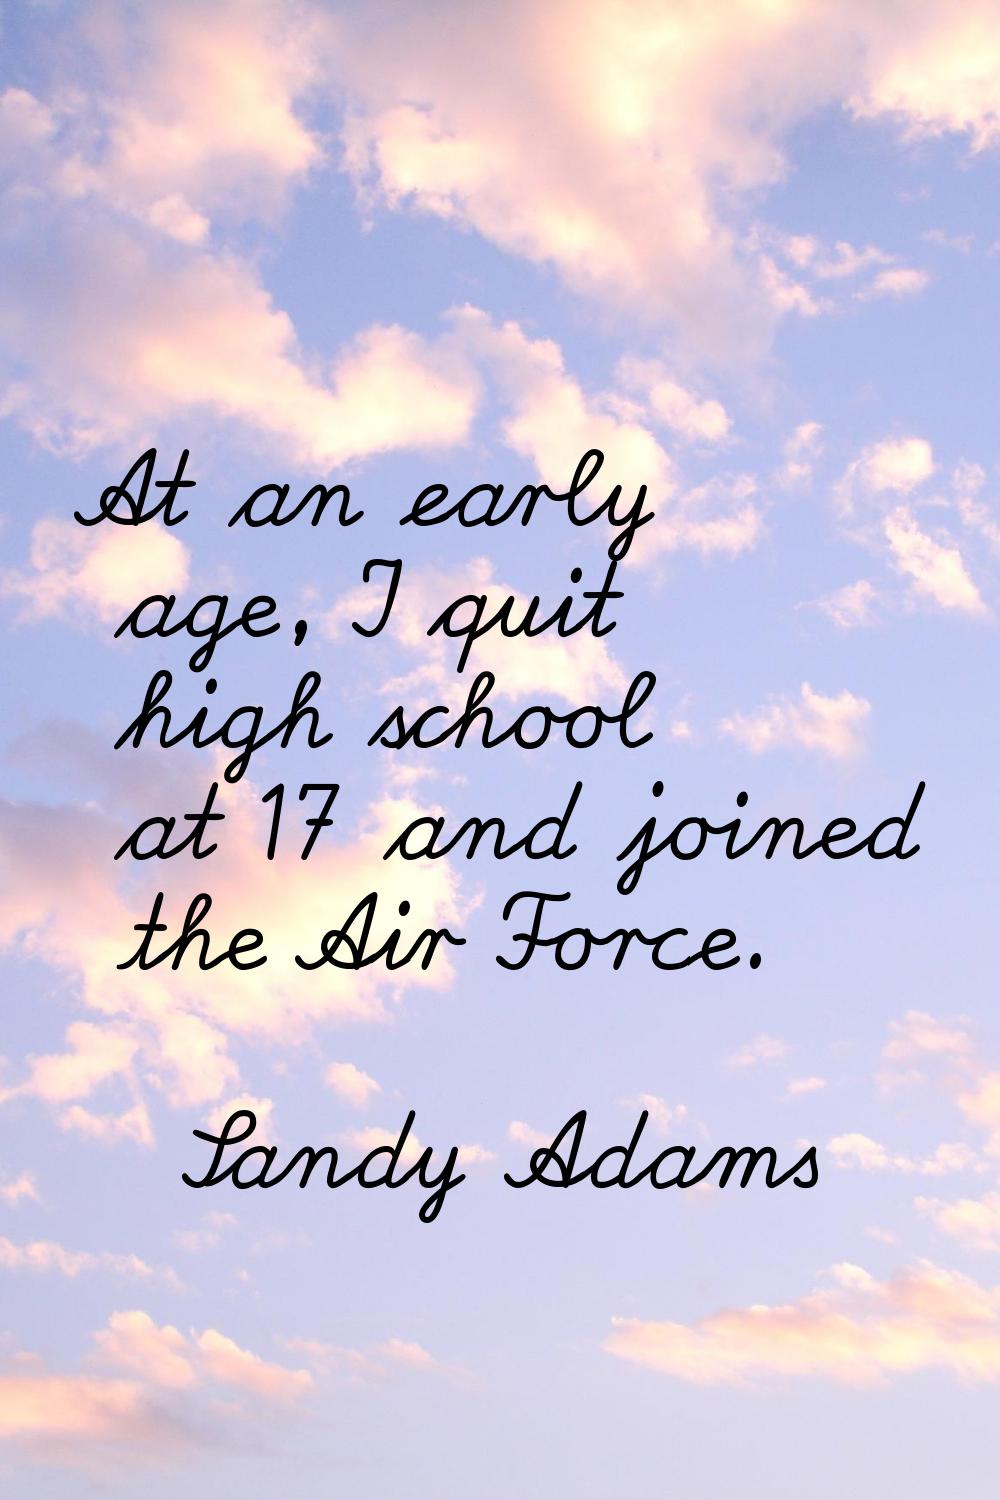 At an early age, I quit high school at 17 and joined the Air Force.